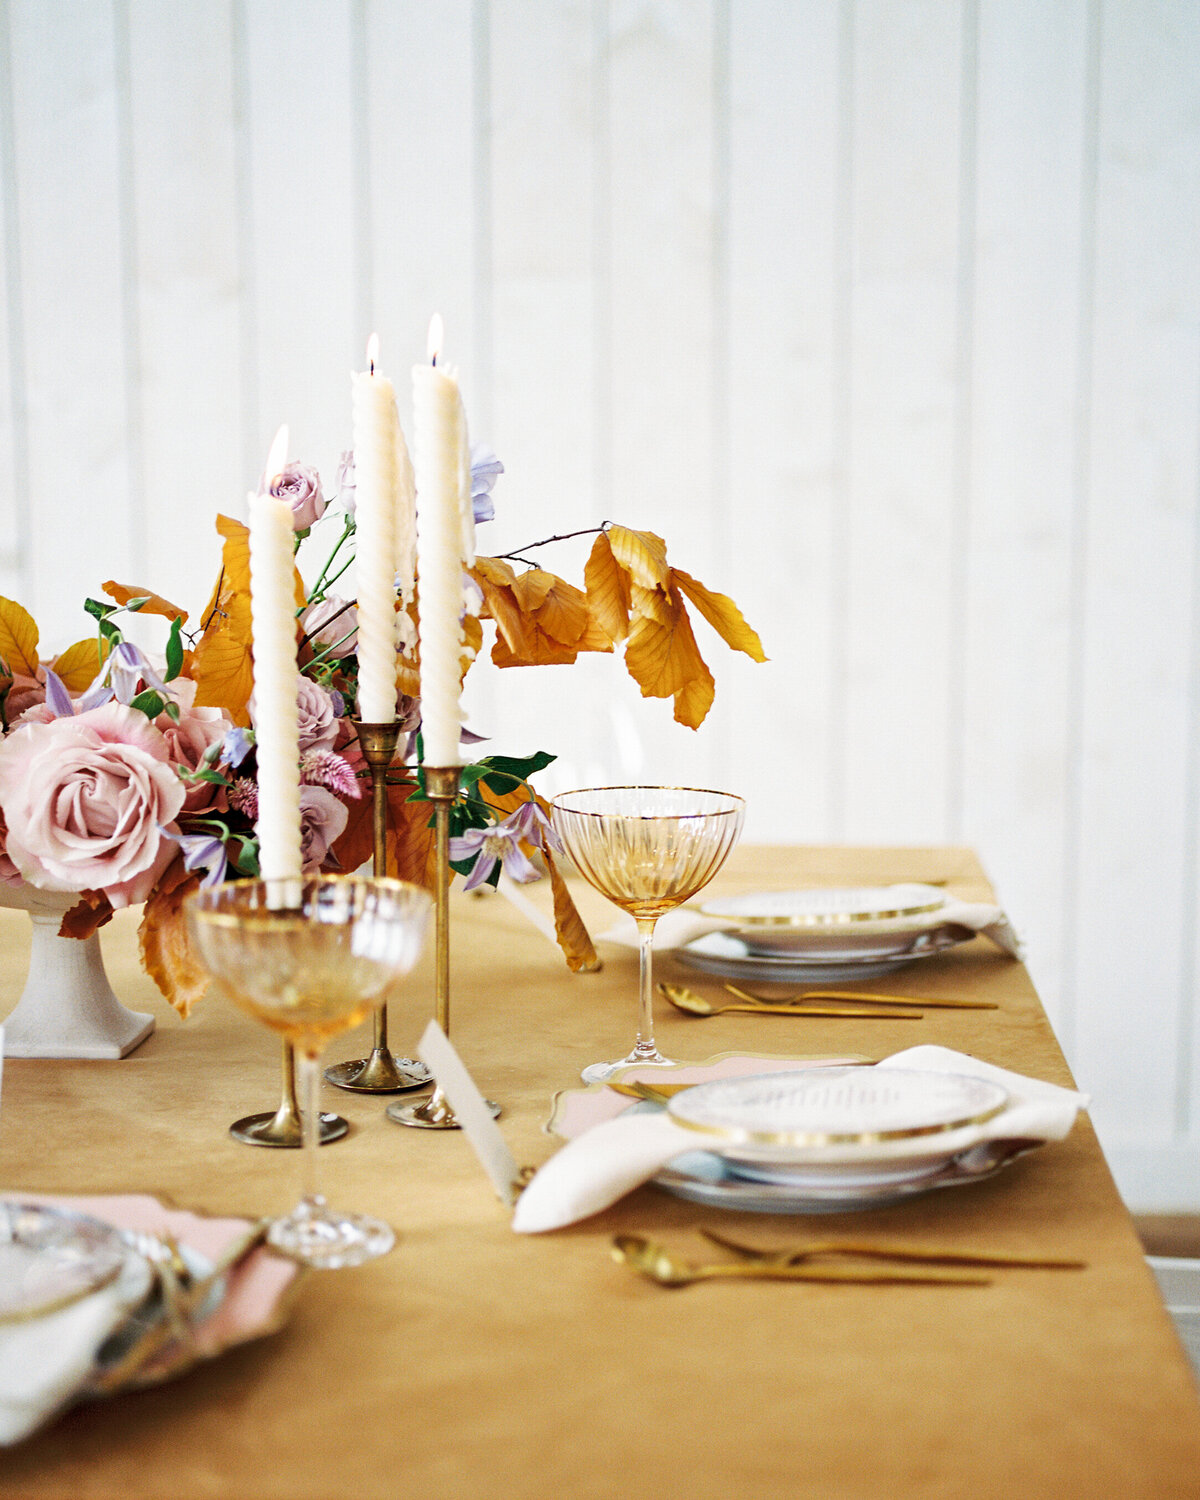 Table setting closeup with candlesticks and golden warm touches